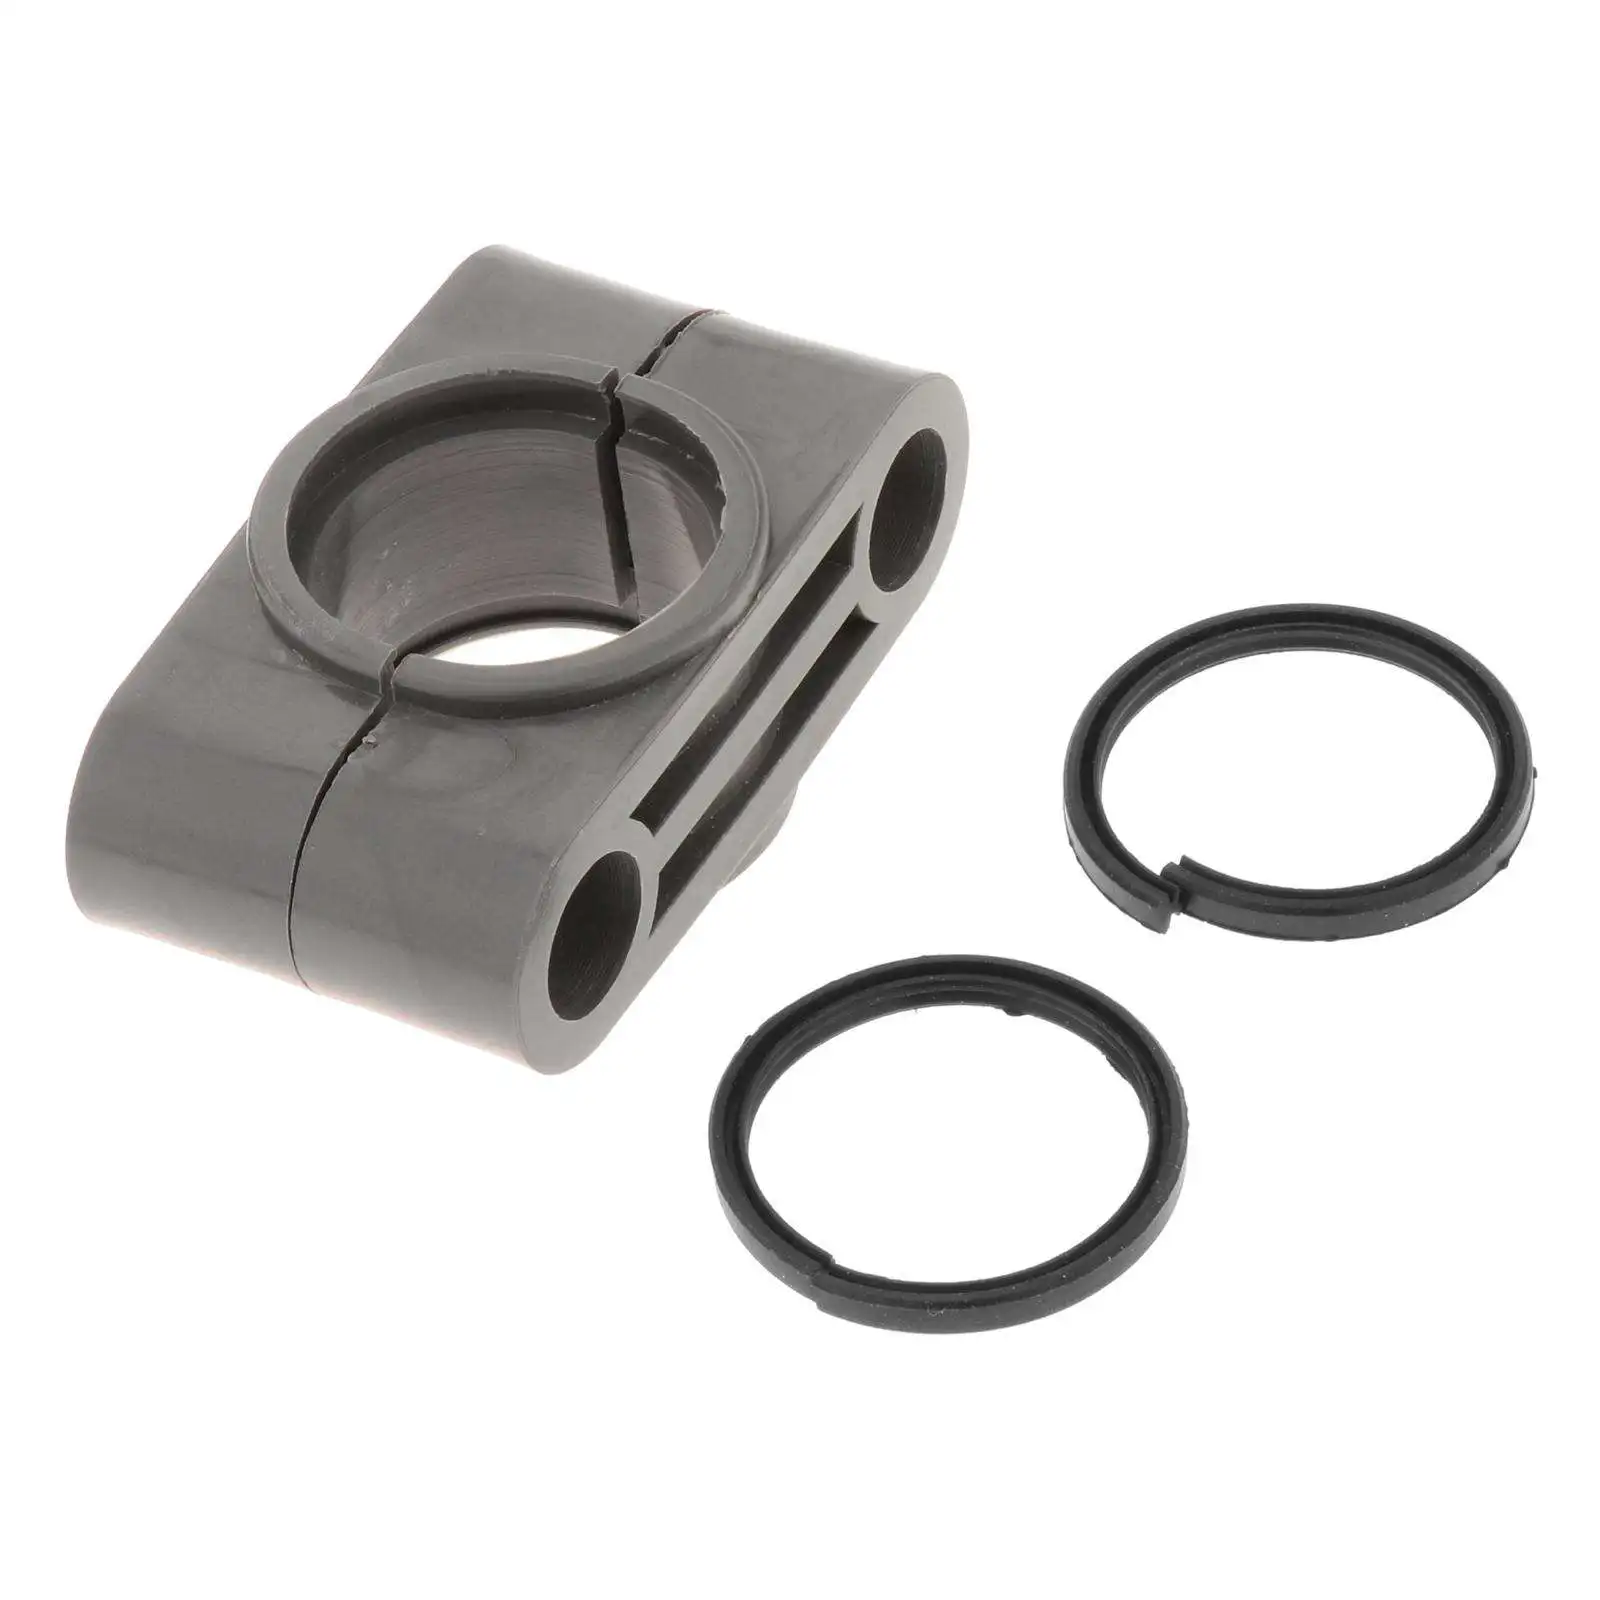 Motorcycle Steering Stem Bushing Seal Yamaha 450 Warrior 1UY-23812-00-00 Replace Accessories Parts Easy Install